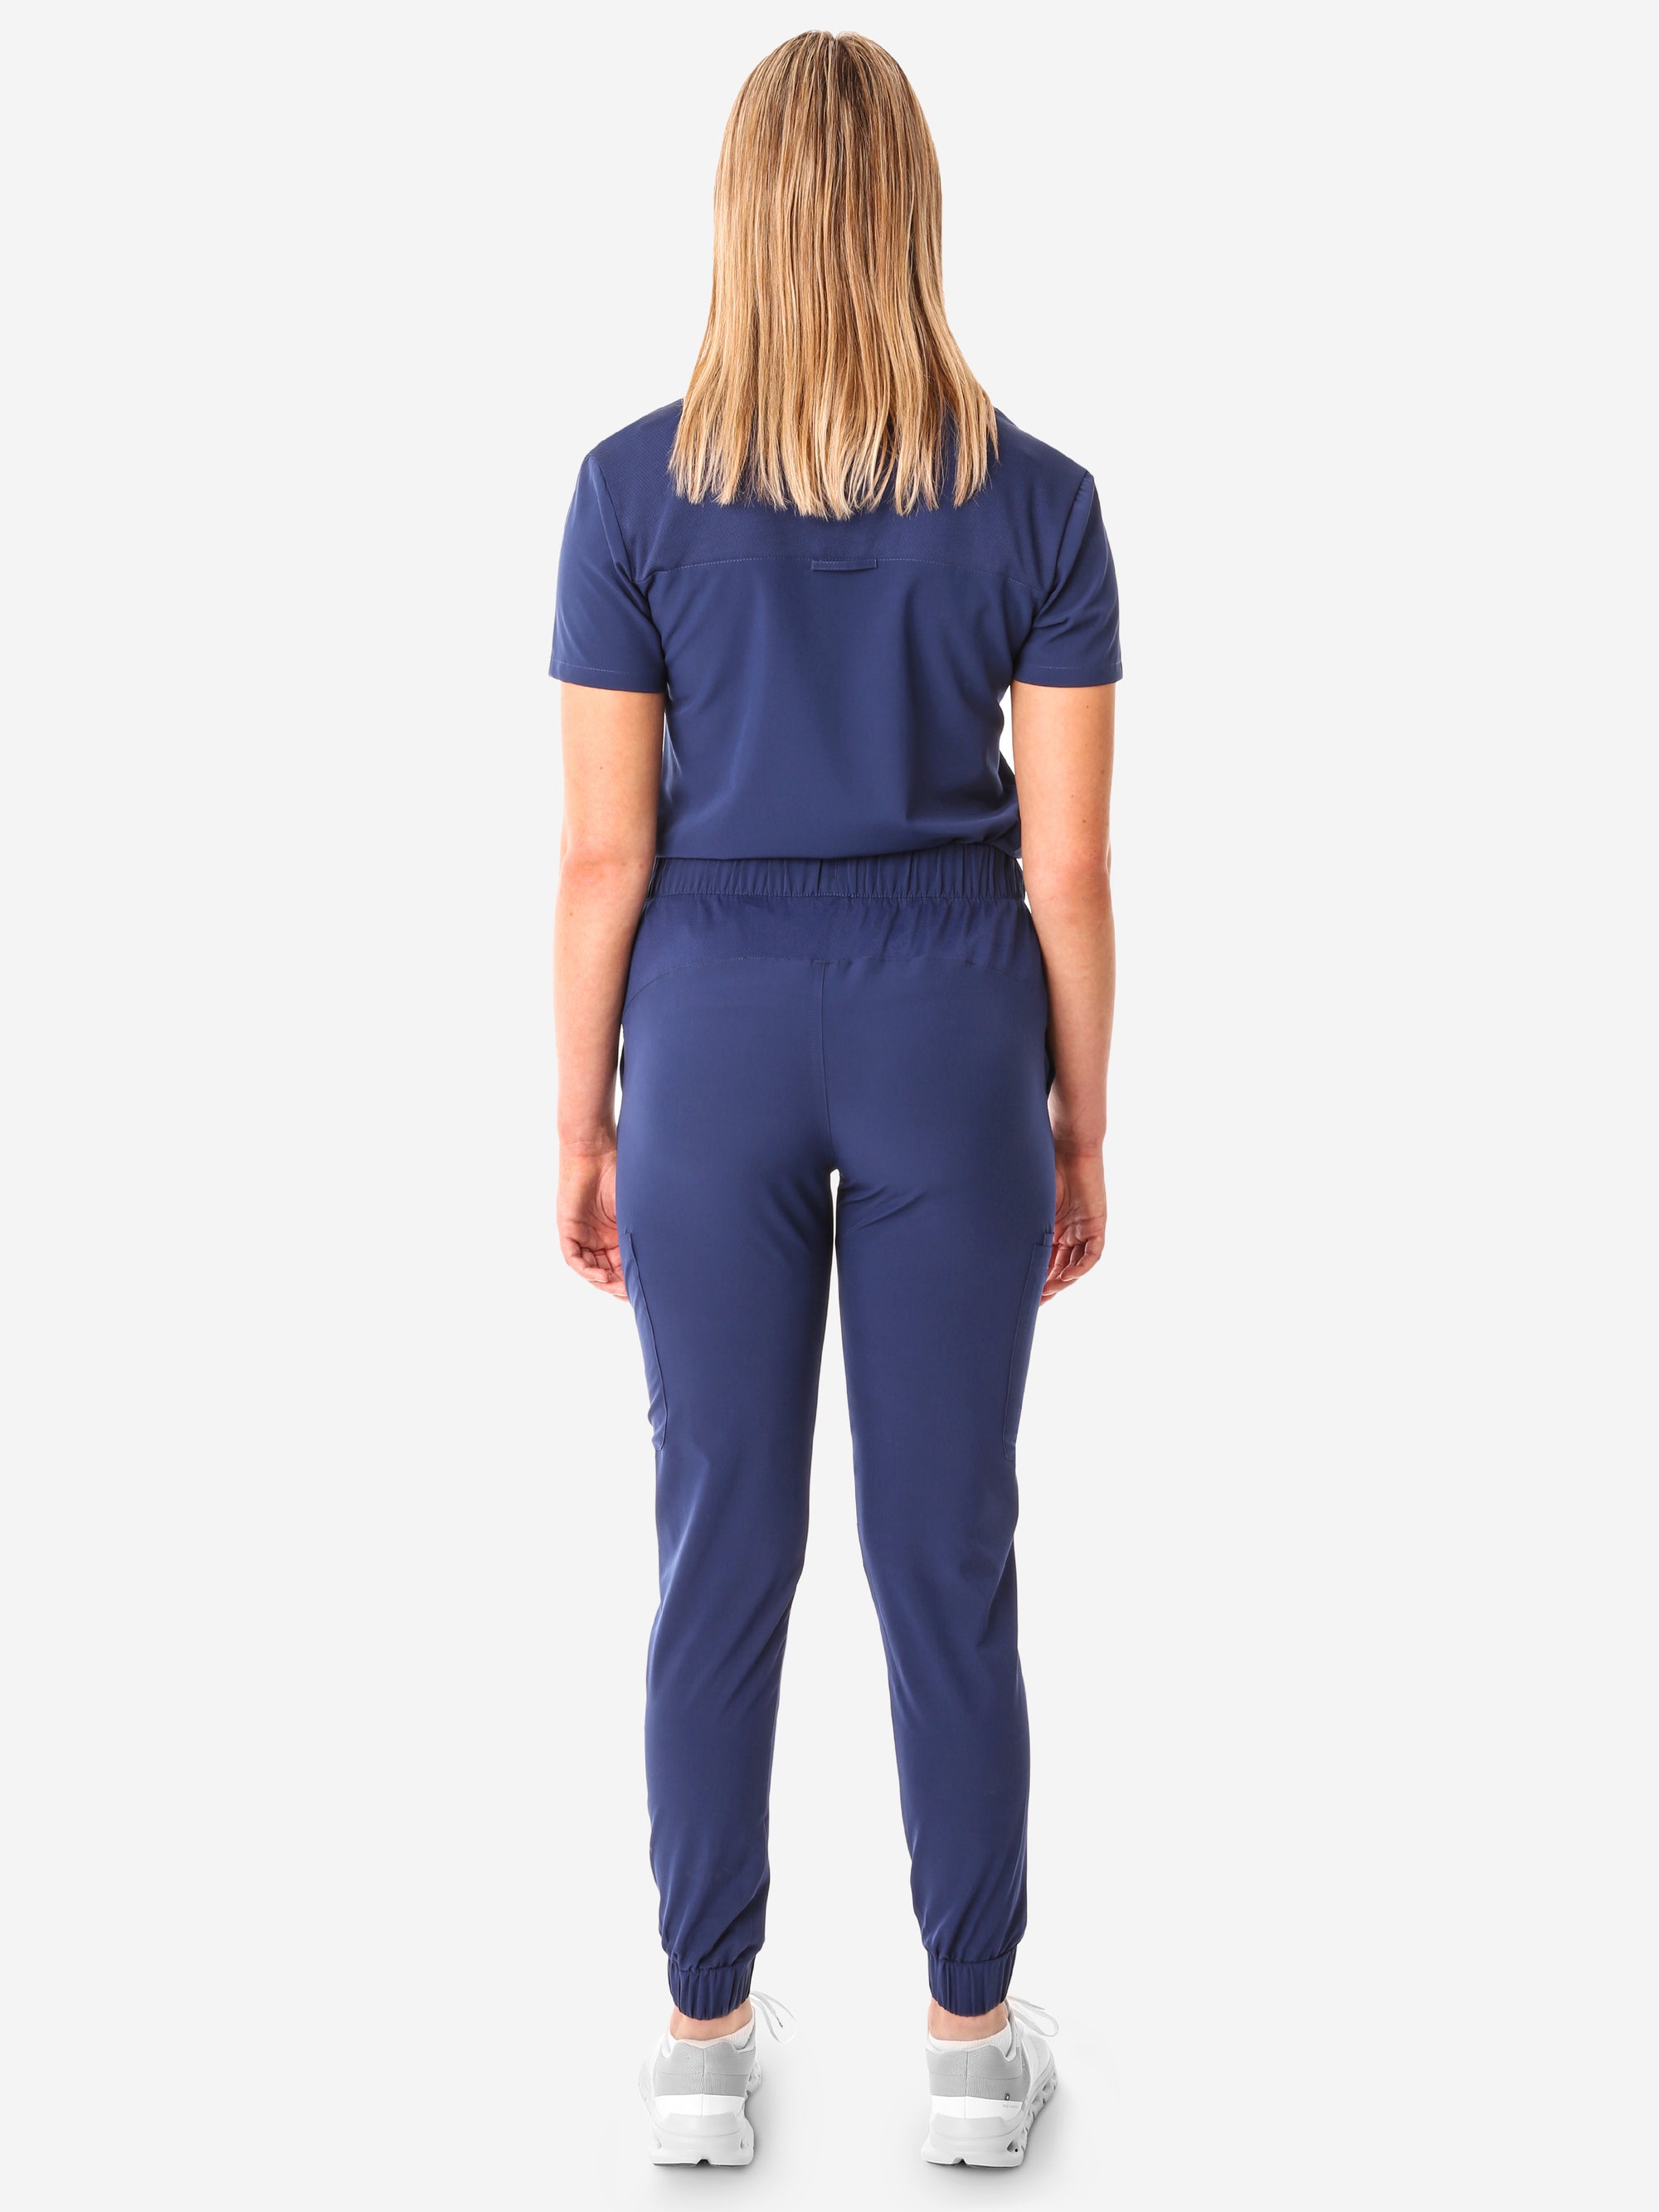 TiScrubs Navy Blue Women&#39;s Stretch Perfect Jogger Pants and One-Pocket Tuckable Top Back View Full Body